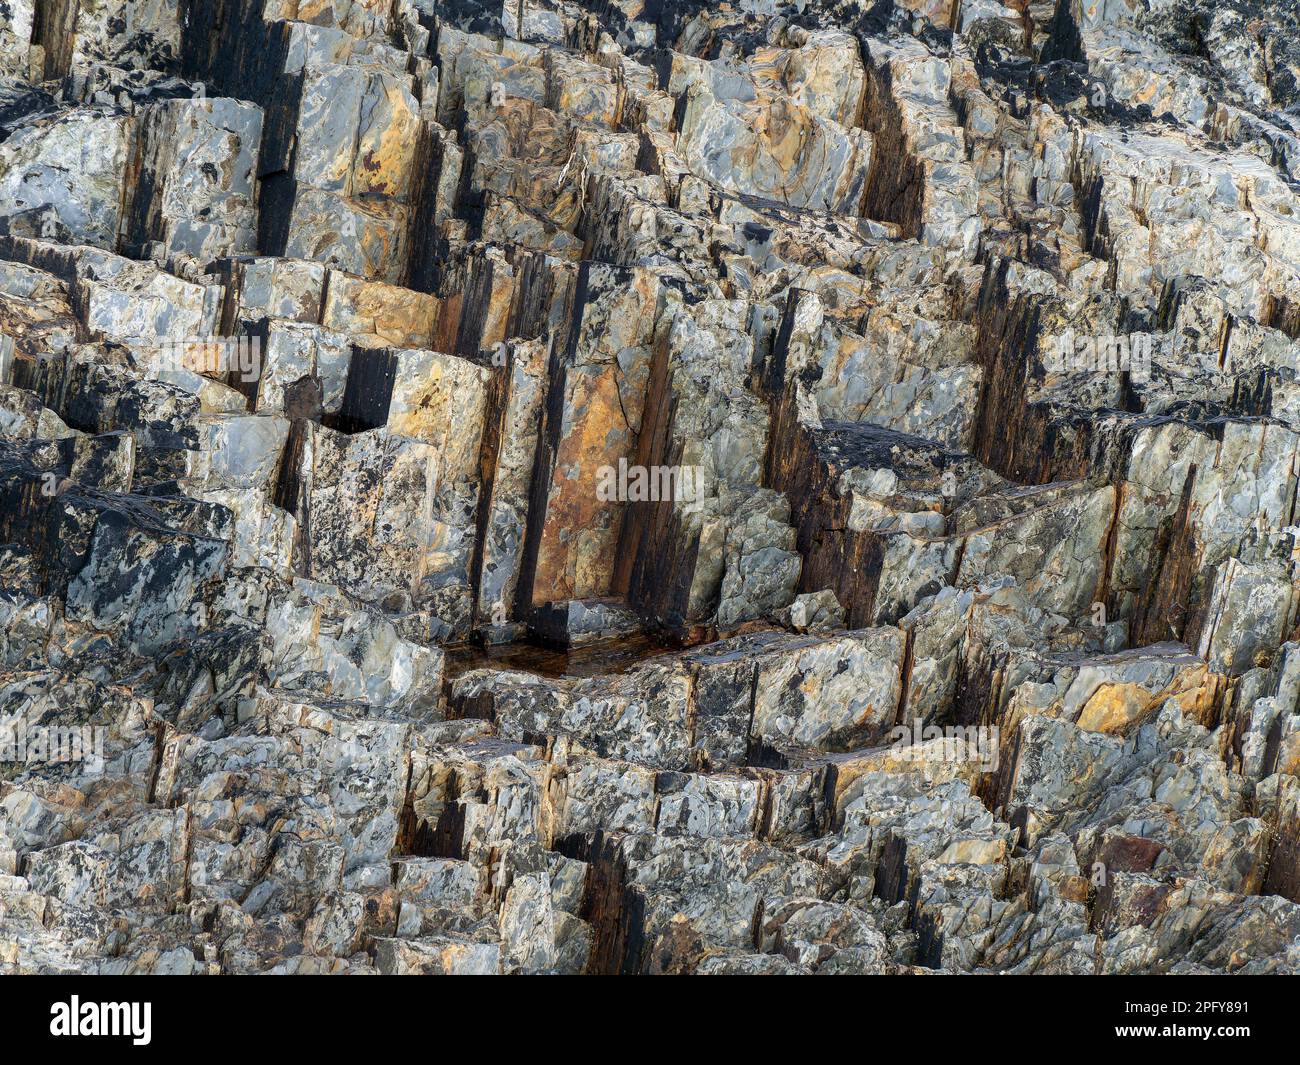 7,346 Sharp Rock Formation Images, Stock Photos, 3D objects, & Vectors